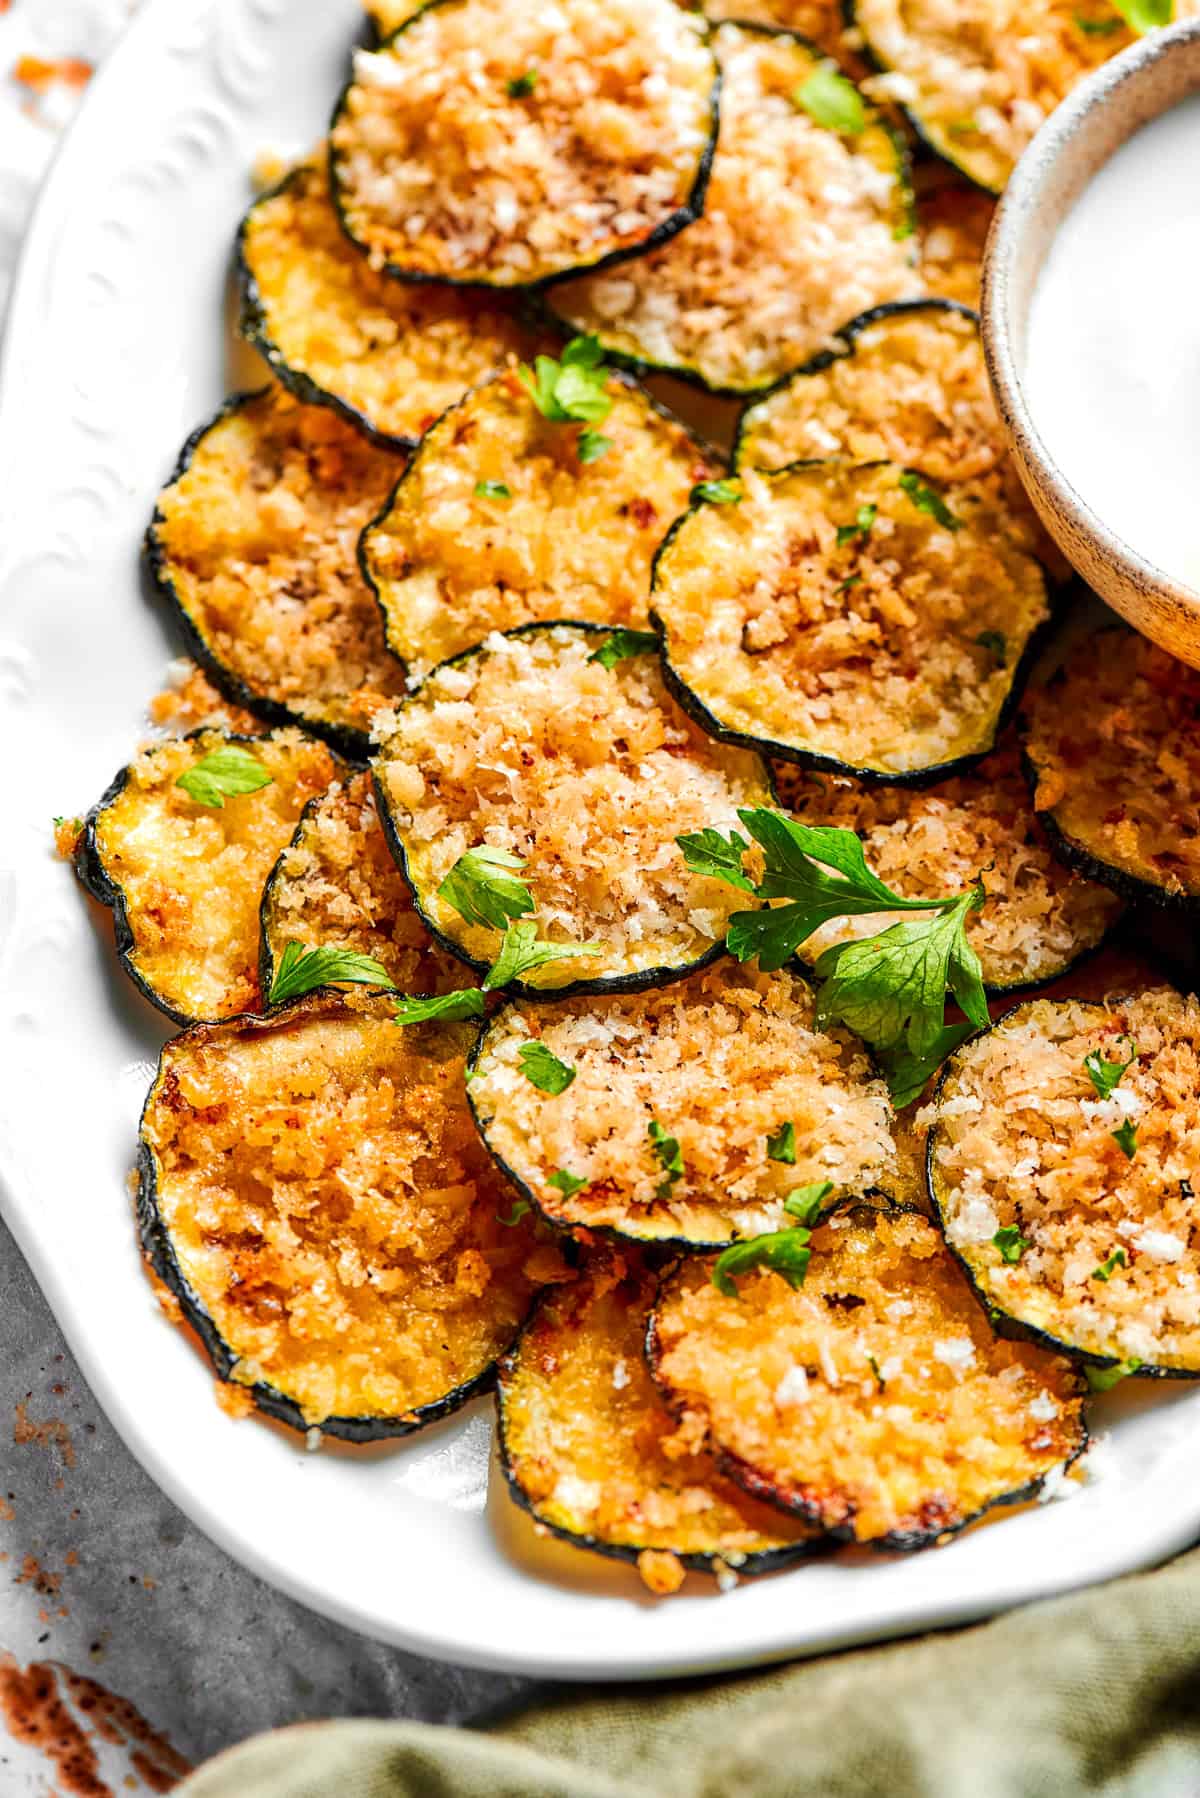 A pile of zucchini chips arranged on a plate.